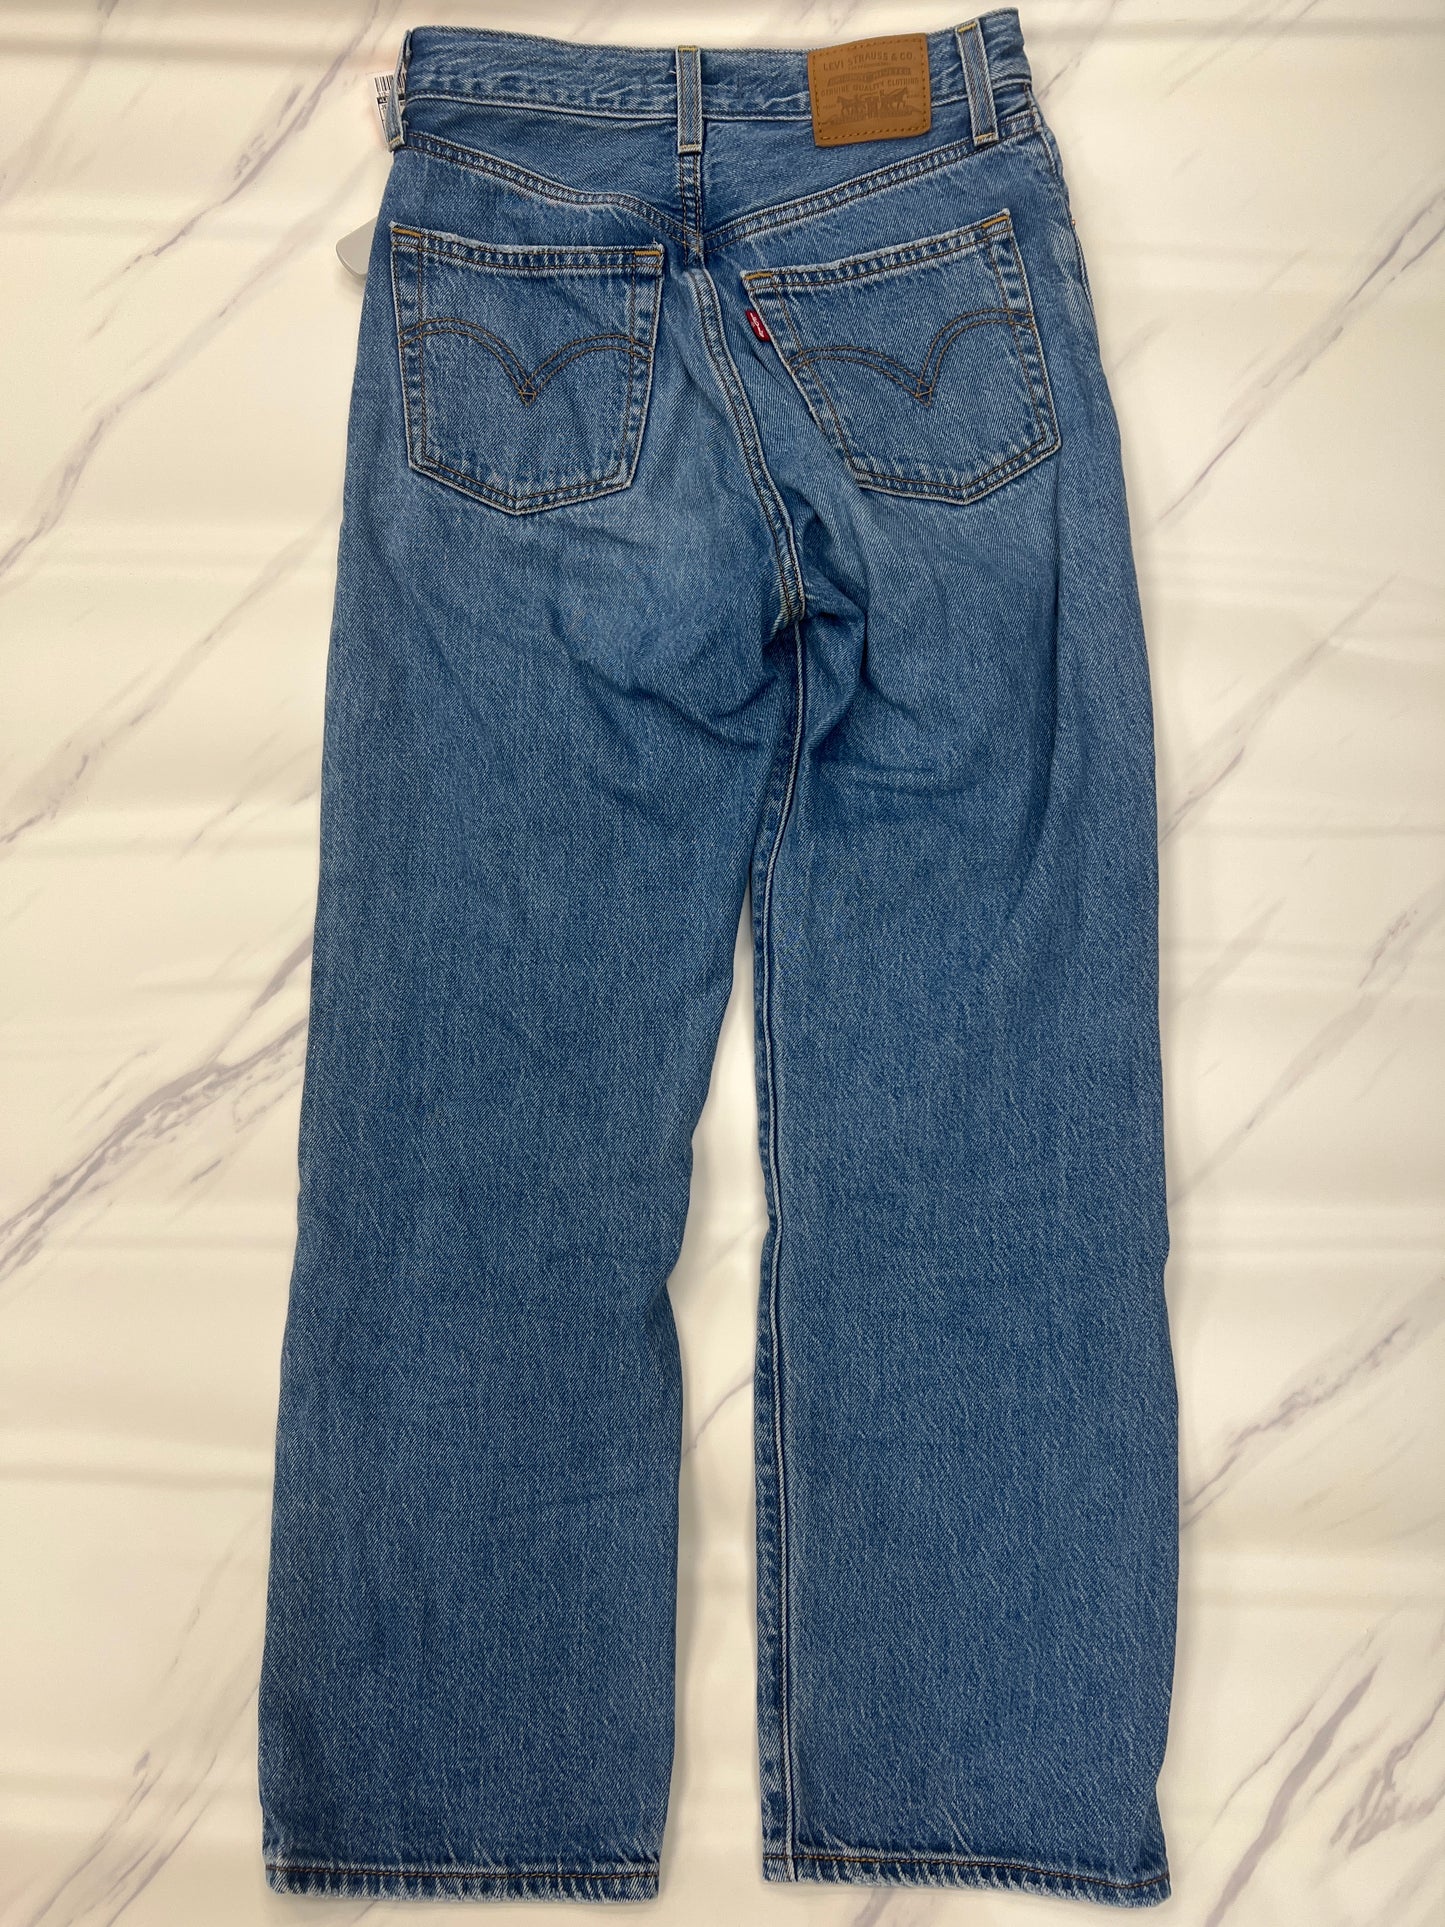 Jeans Relaxed/boyfriend By Levis  Size: 0